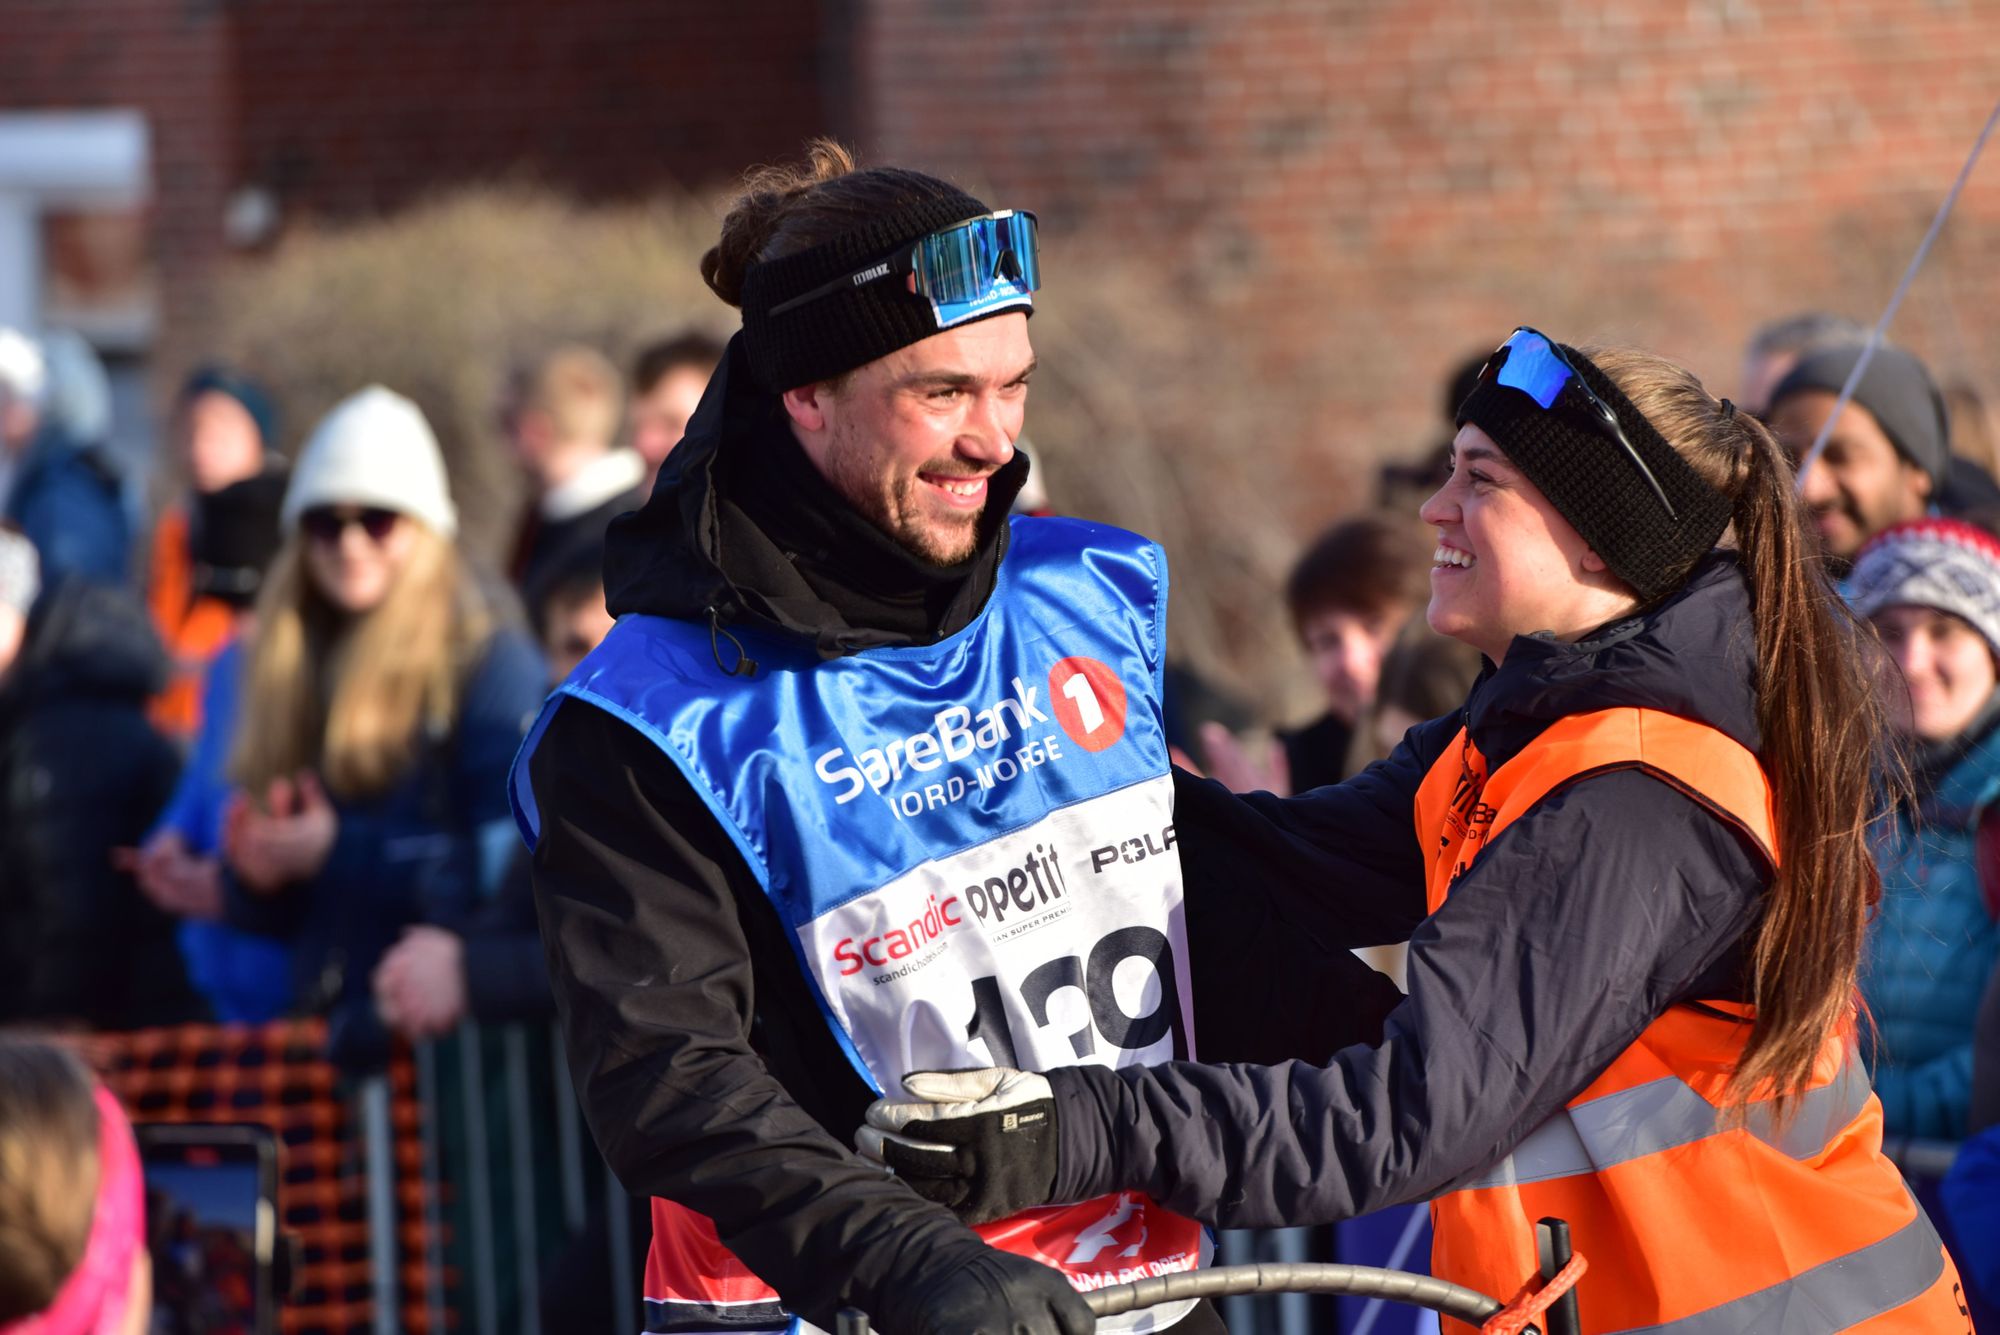 Brage Jæger being congratulated by his sister after coming fifth place in the Finnmark Race